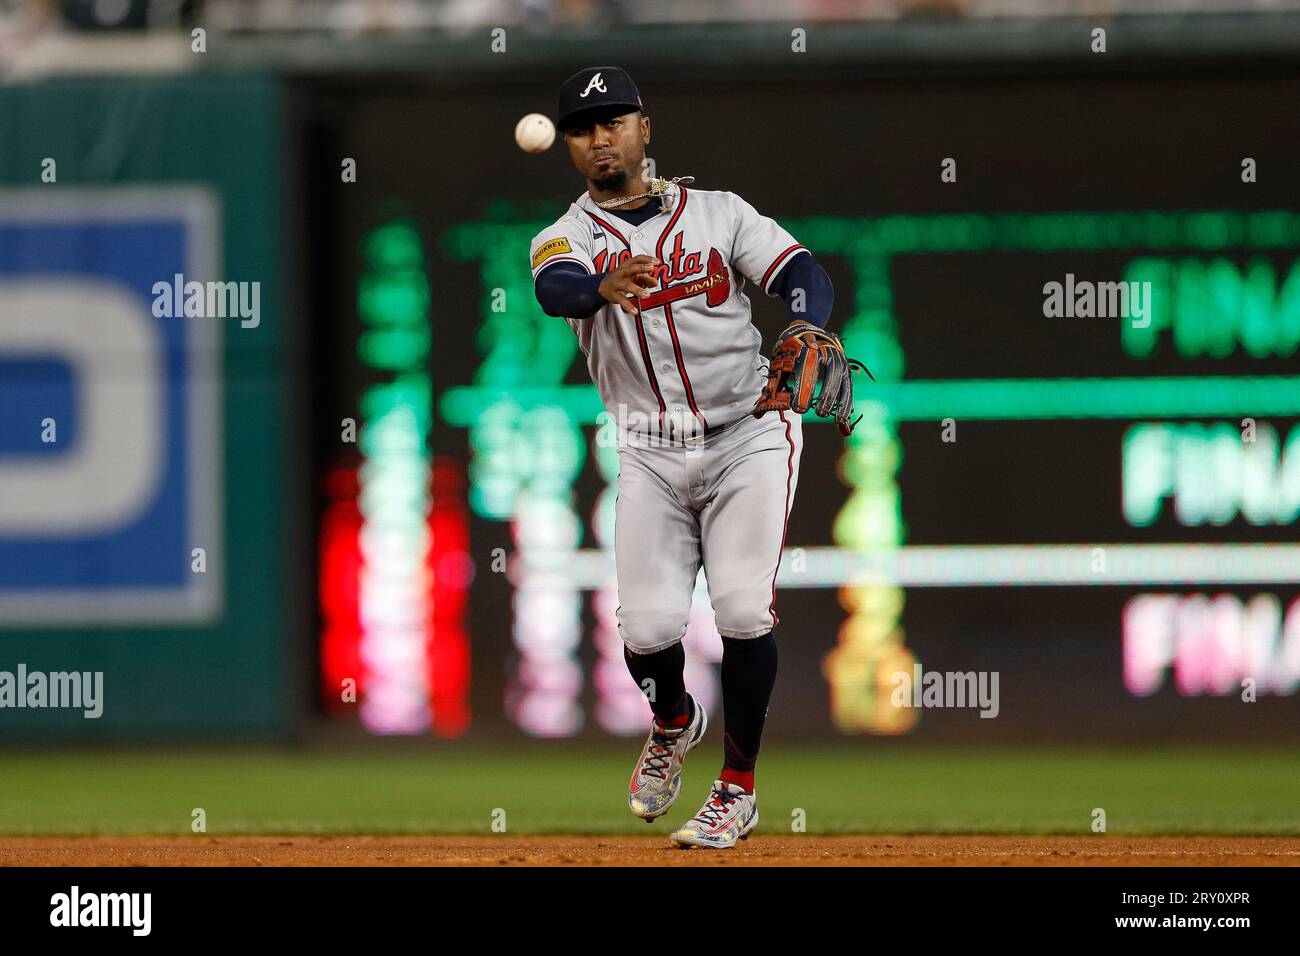 Atlanta Braves second basemen Ozzie Albies (1) throws to first for an out during game 2 of a double header between the Atlanta Braves and Washington N Stock Photo